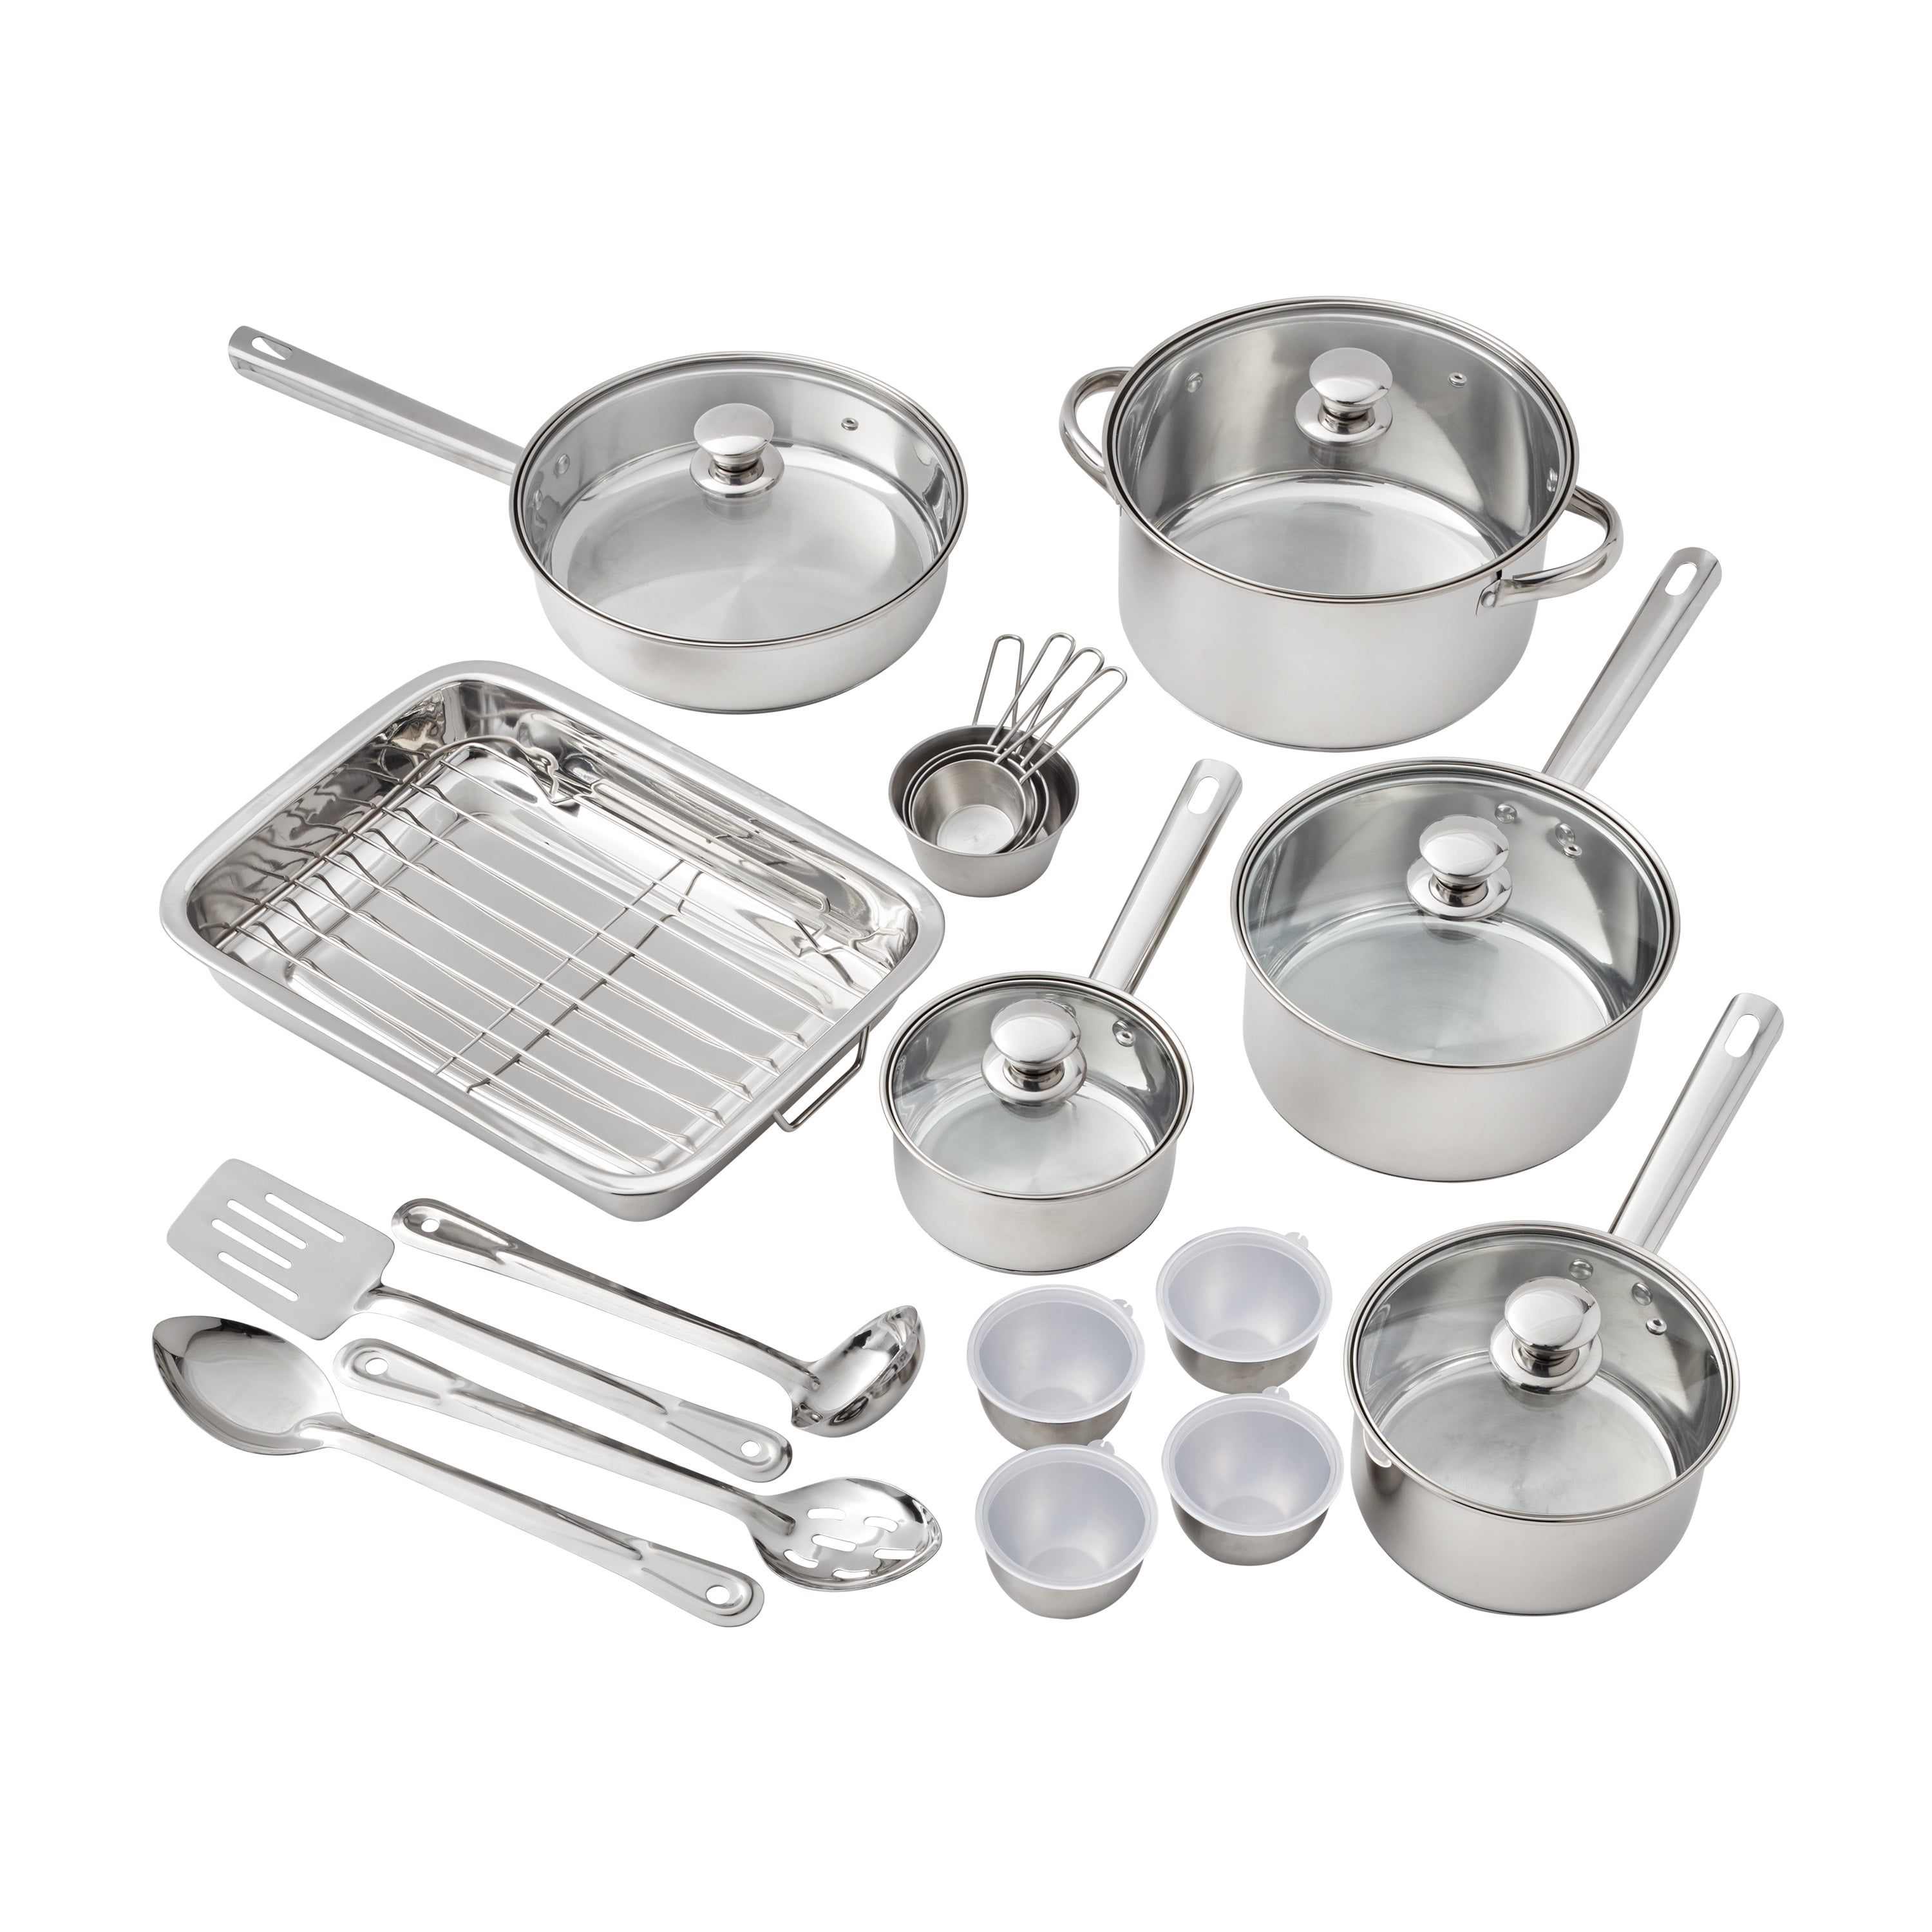 Iridescent Stainless Steel 10-Piece Cookware Set with Kitchen Utensil 